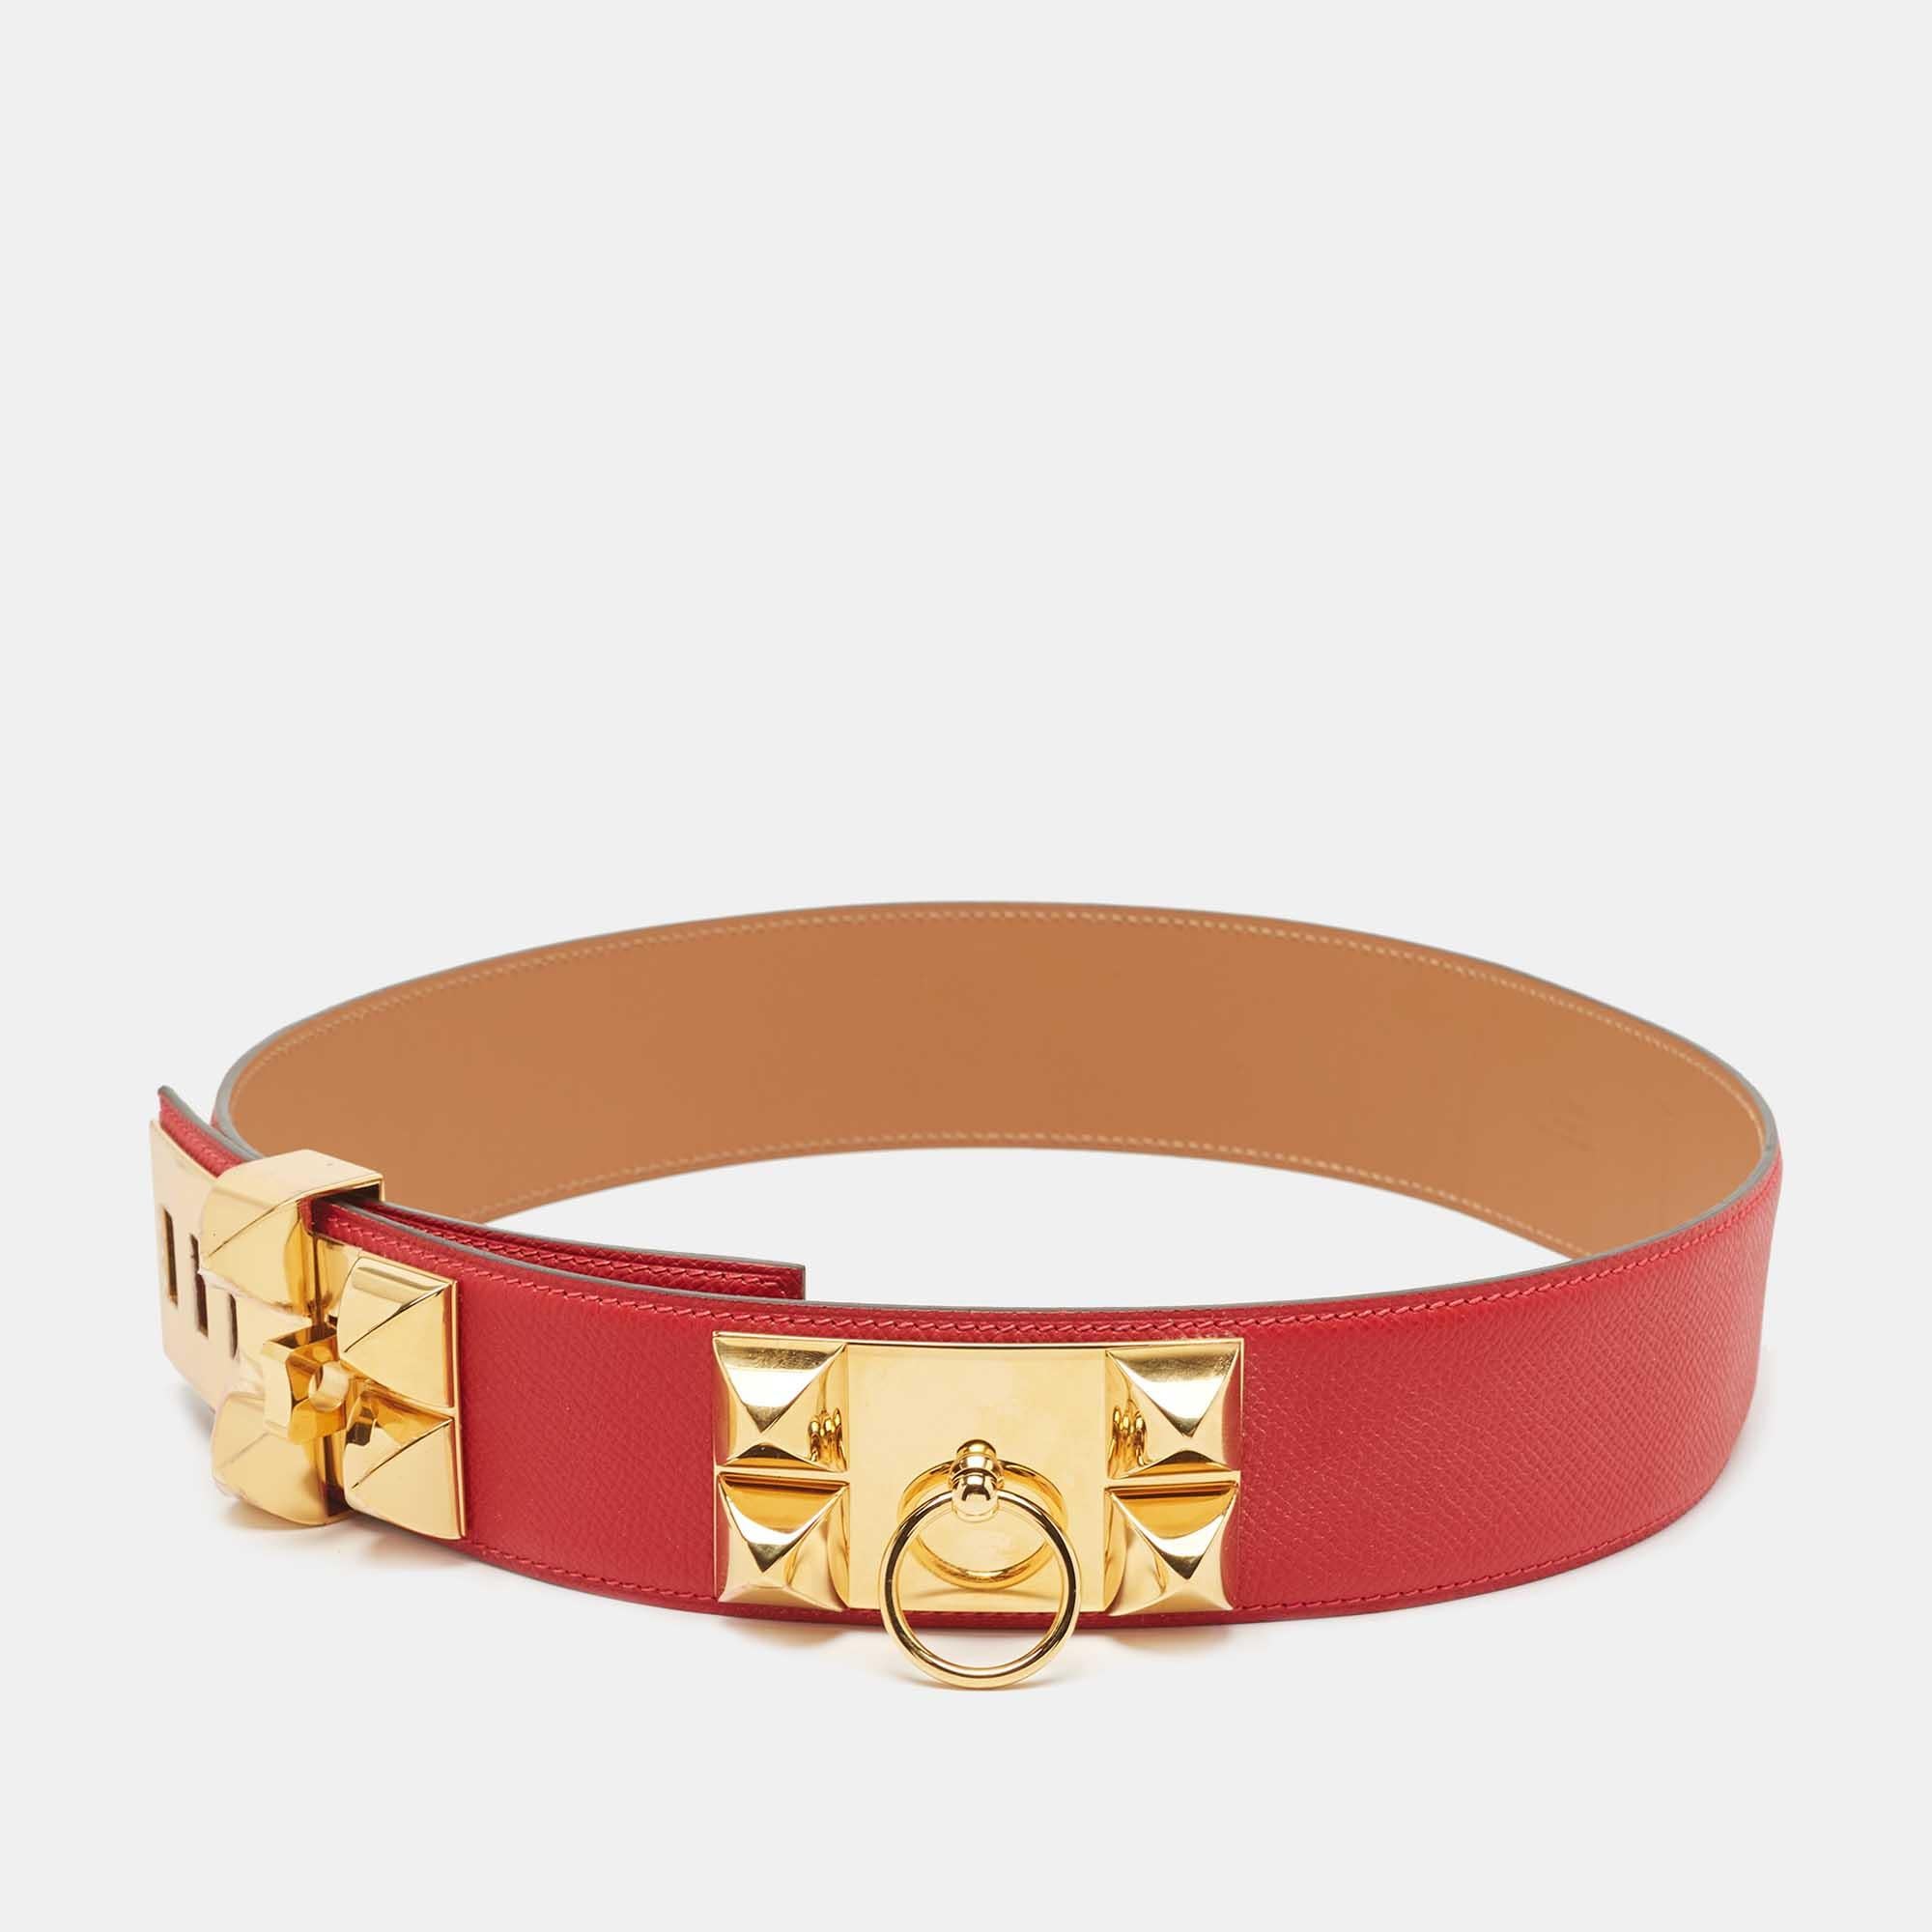 The Hermès Collier De Chien belt is a luxurious accessory characterized by its exquisite craftsmanship. Crafted from durable Epsom leather, it features iconic pyramid studs and a prominent buckle, delivering a blend of sophistication and edginess,